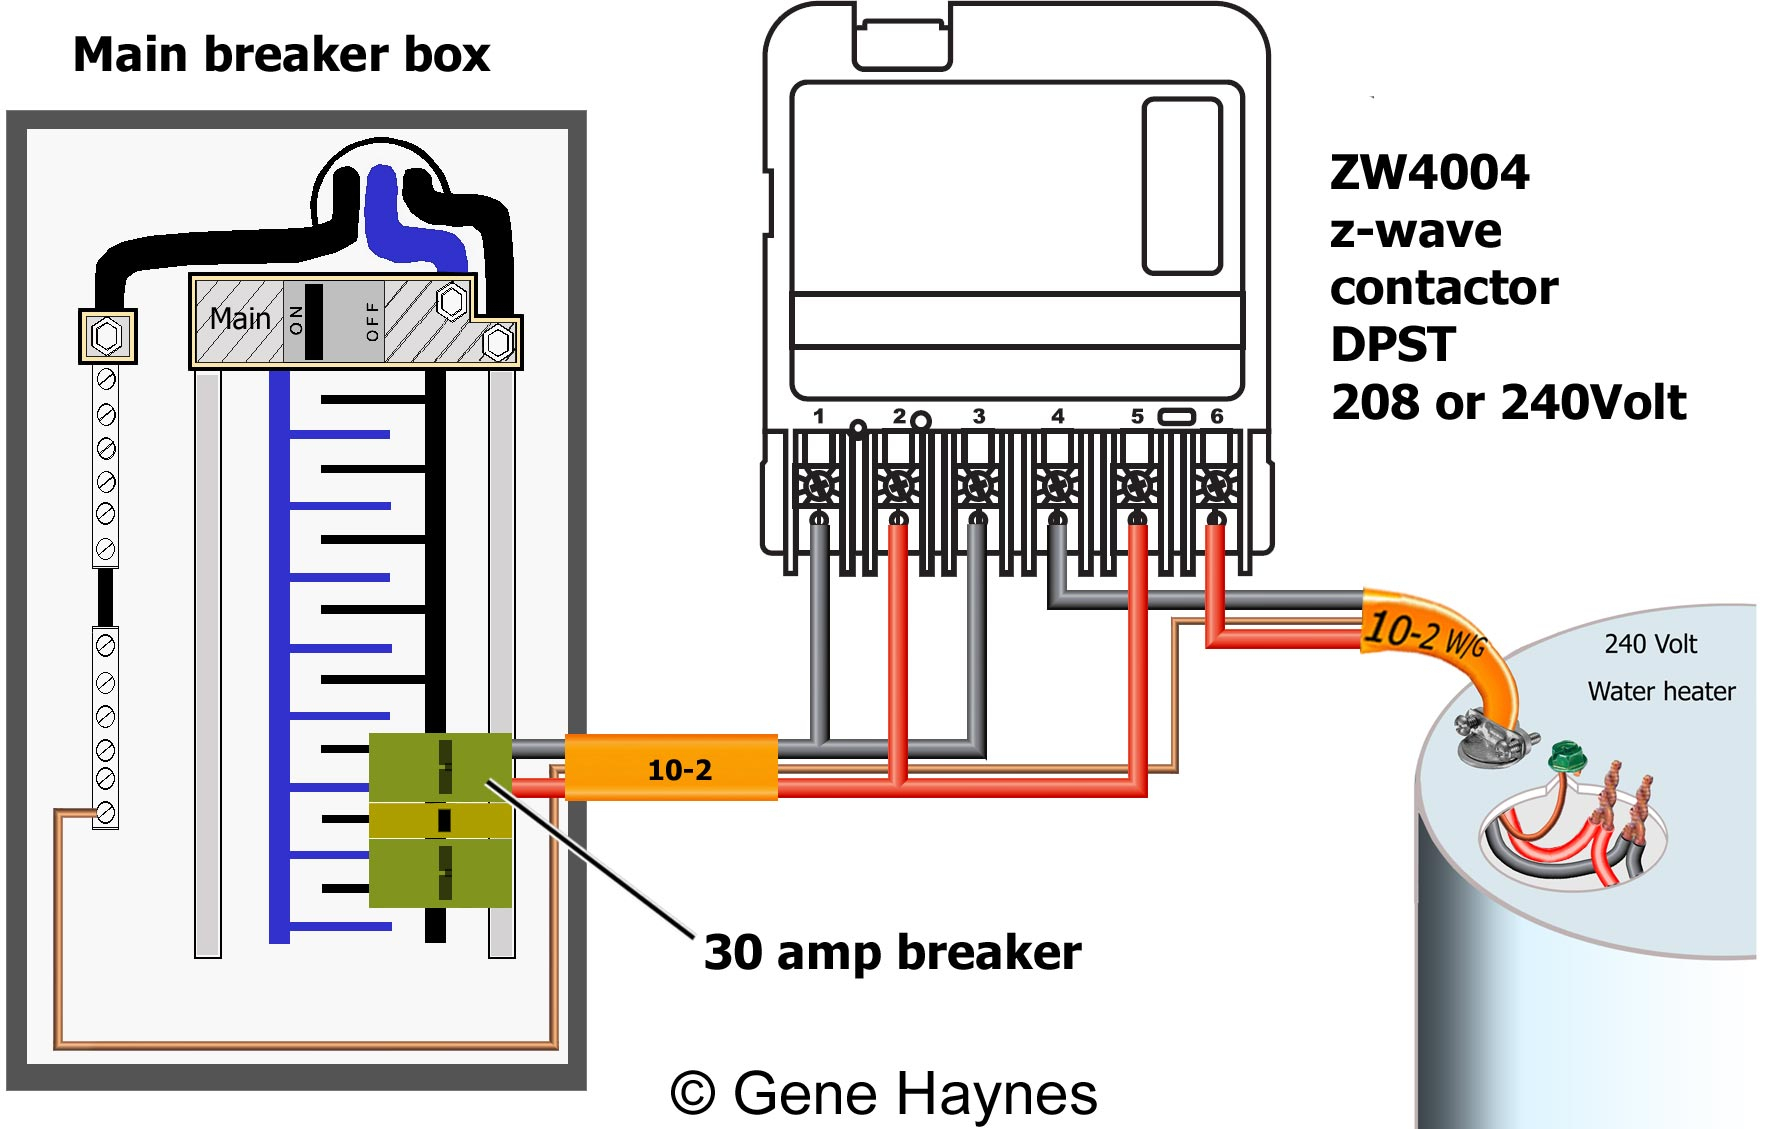 How To Wire Ca3750 Z-Wave Contactor + Zwave Basics - 240 Volt Contactor Wiring Diagram